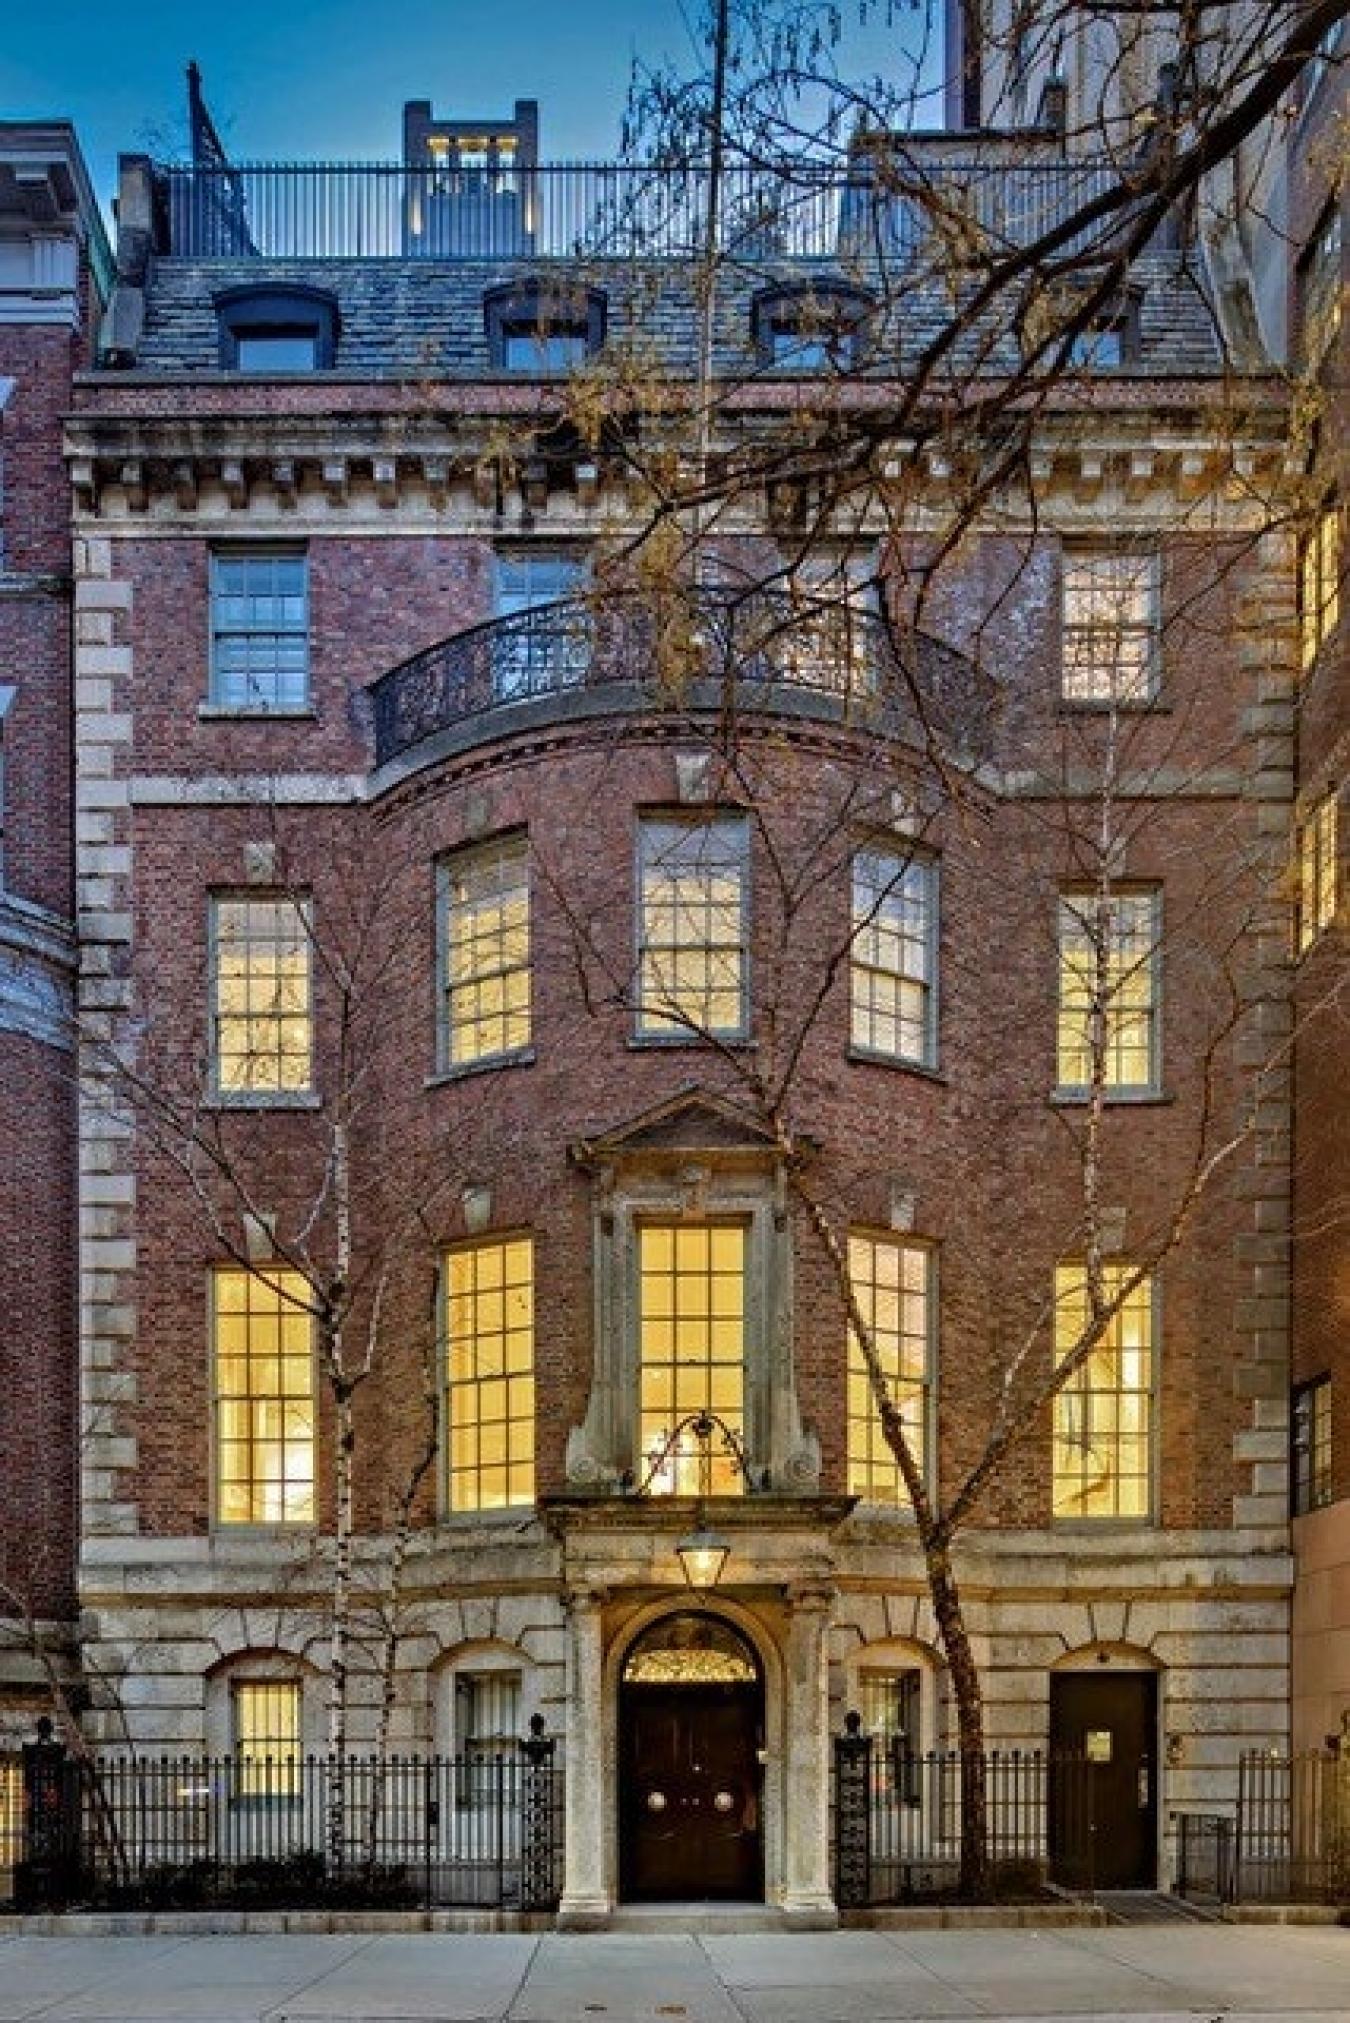 36 EAST 63RD STREET, New York, New York, 10065, United States, 10 Bedrooms Bedrooms, ,10 BathroomsBathrooms,Residential,For Sale,36 EAST 63RD STREET,1471496